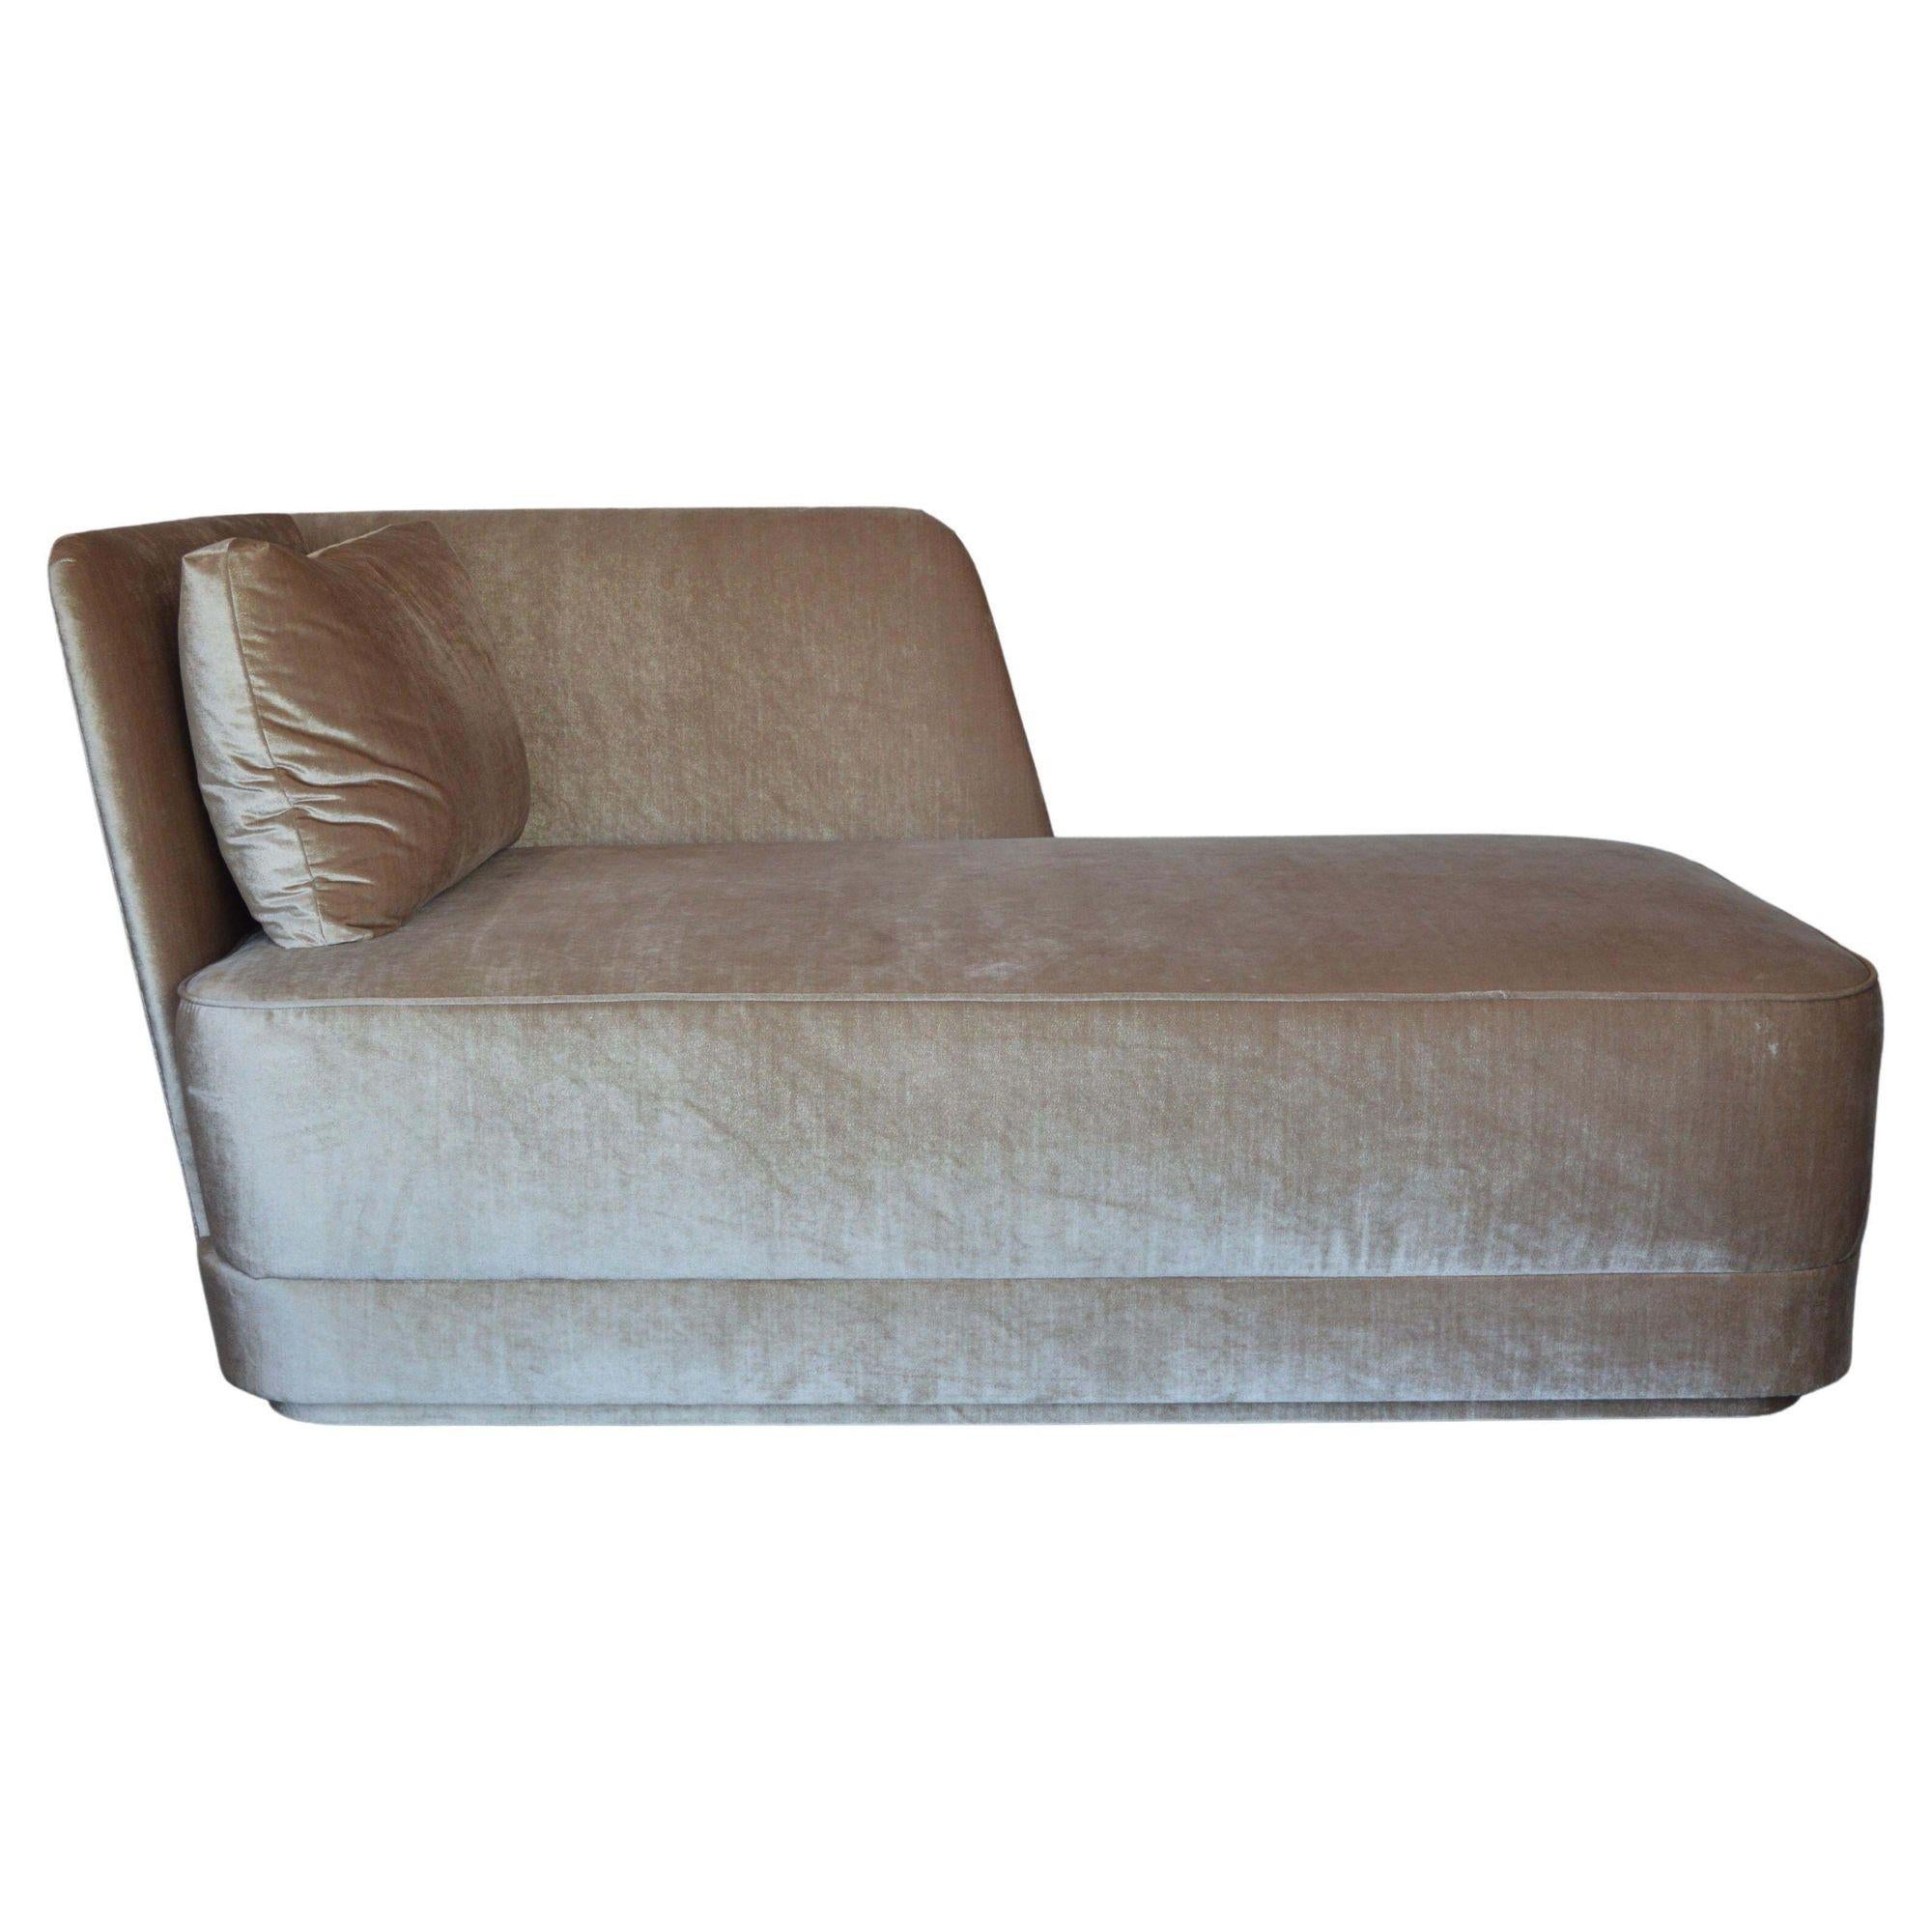 Newly upholstered champagne silk velvet and stiched leather back detail. Can be used as a small sofa as well.